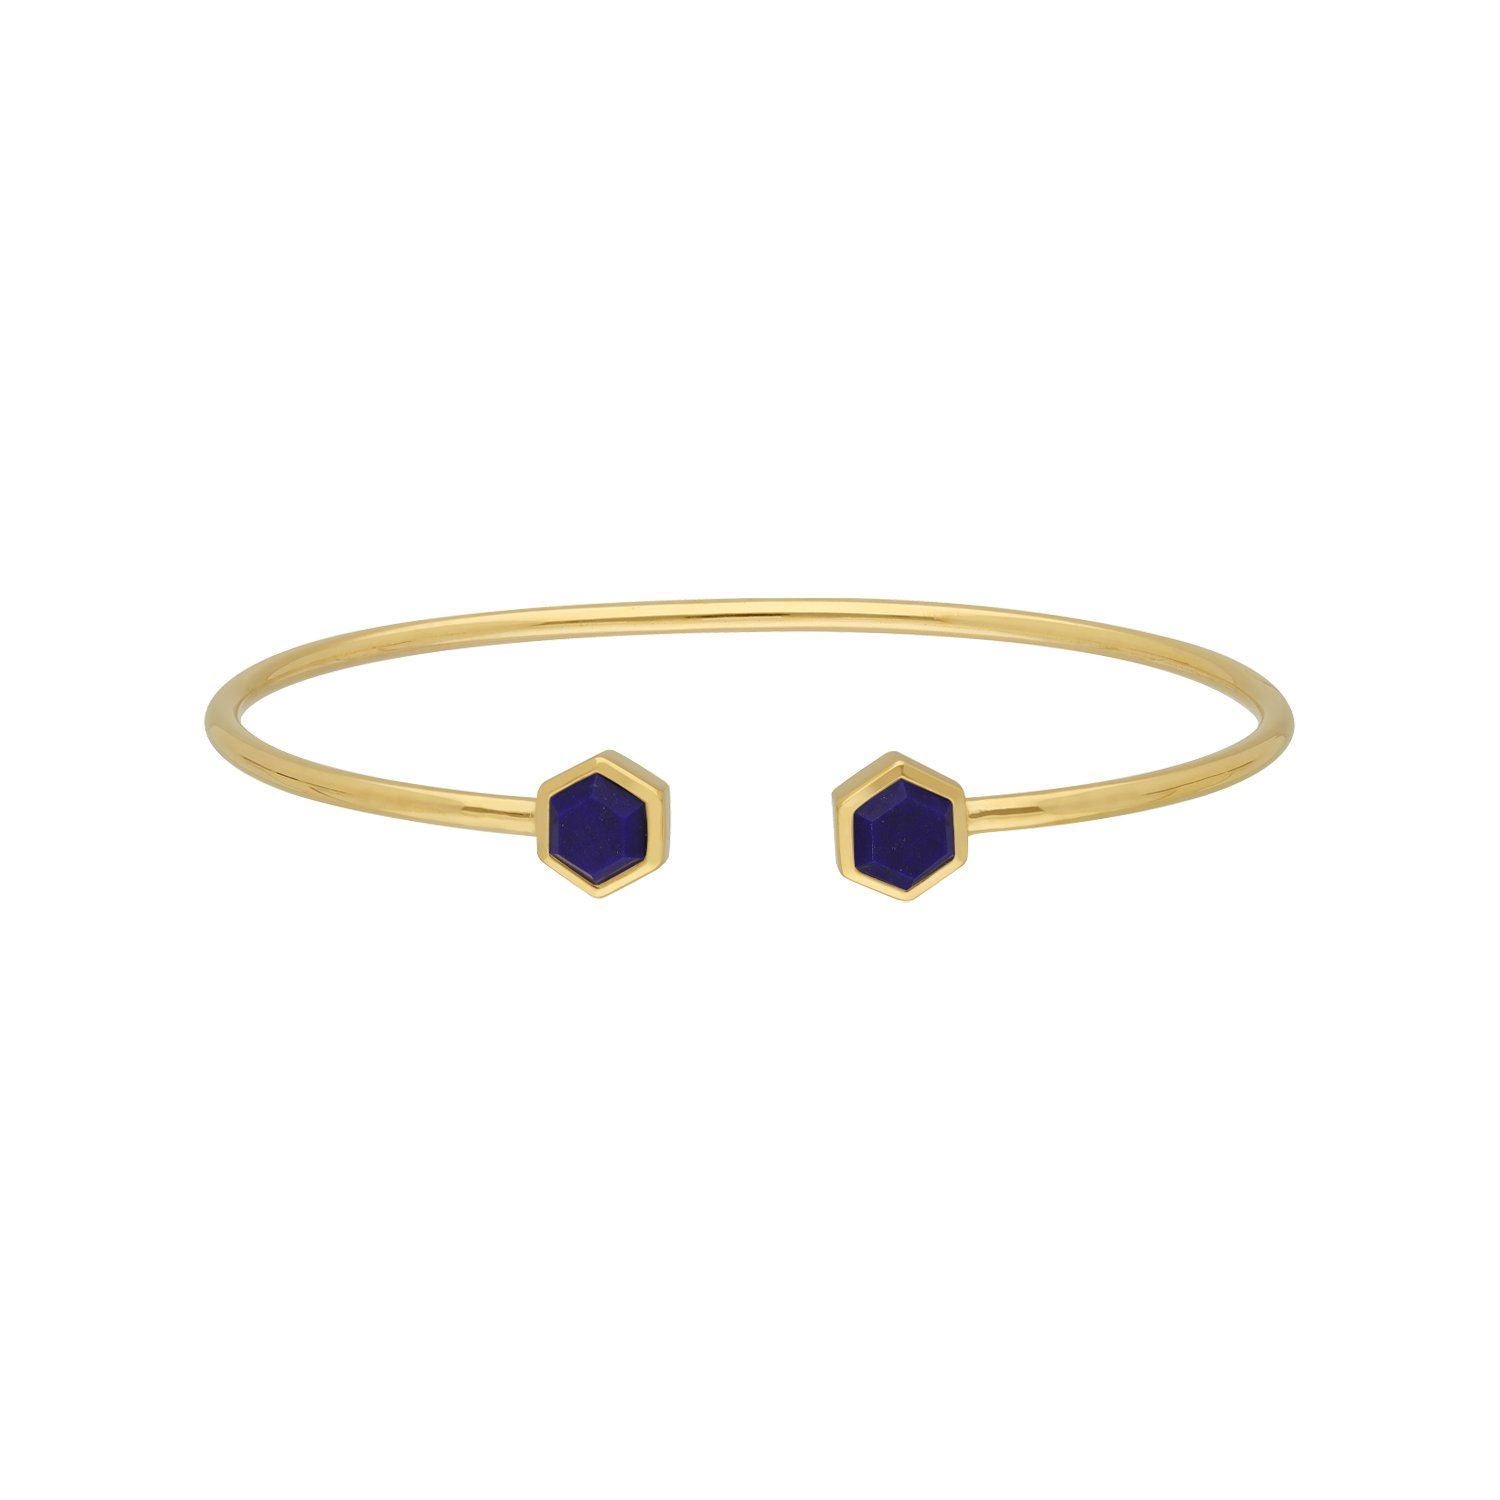 Geometric Hexagon Lapis Lazuli Bangle in Gold Plated Sterling Silver